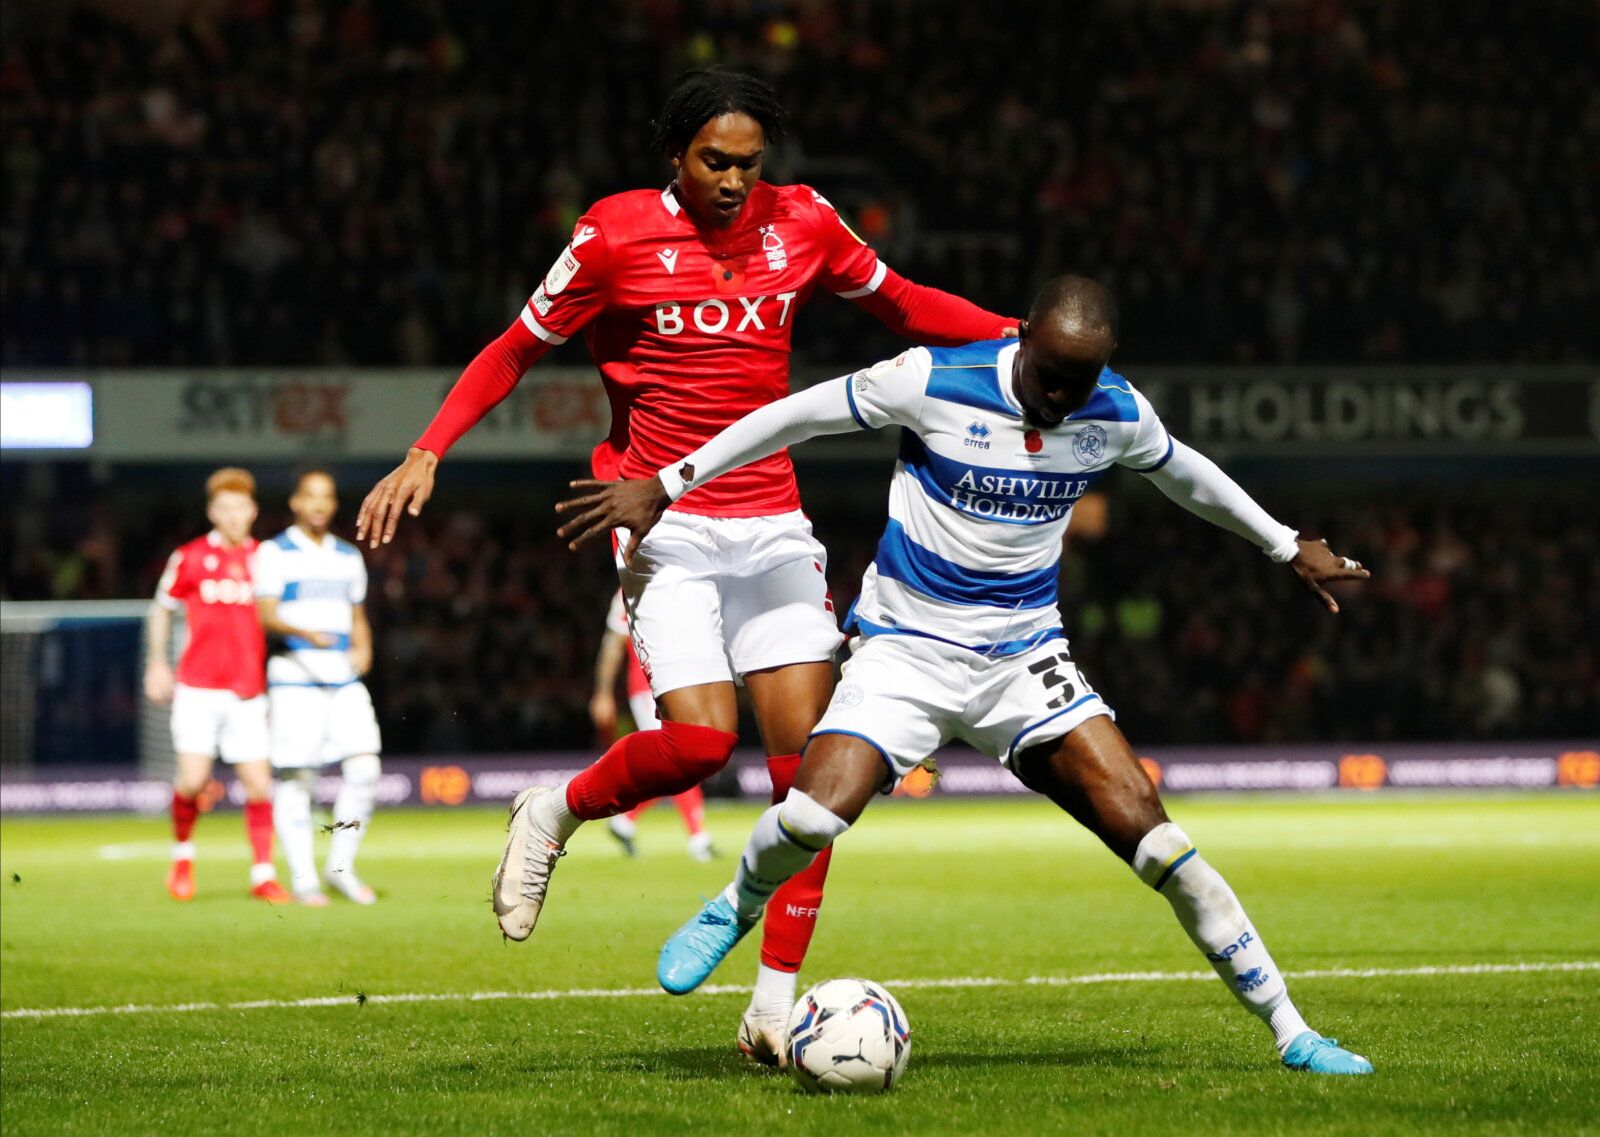 Soccer Football - Championship - Queens Park Rangers v Nottingham Forest - Loftus Road, London, Britain - October 29, 2021  Queens Park Rangers' Albert Adomah in action with Nottingham Forest's Djed Spence   Action Images/Paul Childs  EDITORIAL USE ONLY. No use with unauthorized audio, video, data, fixture lists, club/league logos or 